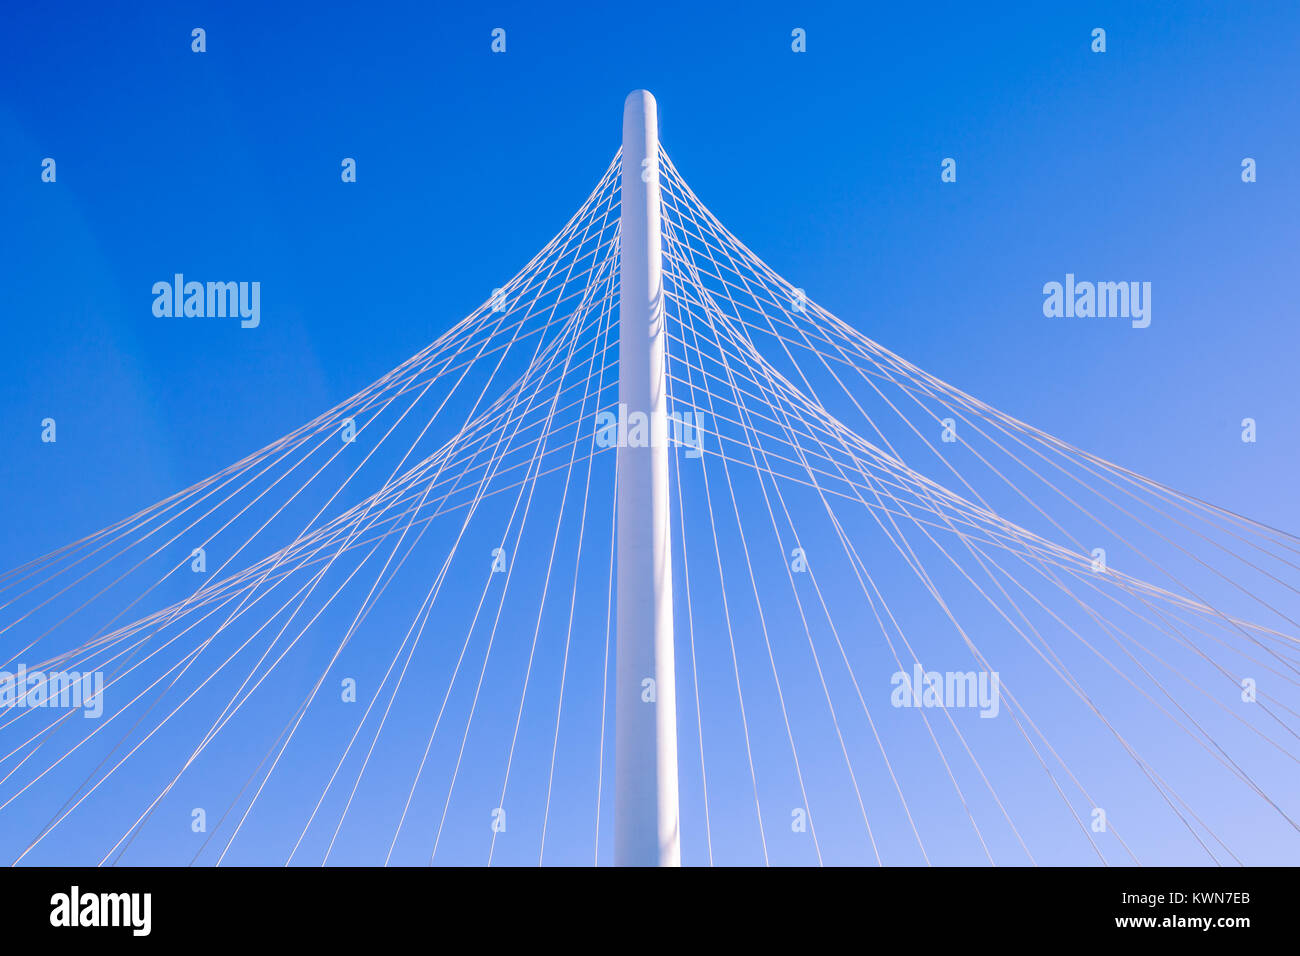 Pylon of cable-stayed bridge with cables forming a fan-like pattern Stock Photo